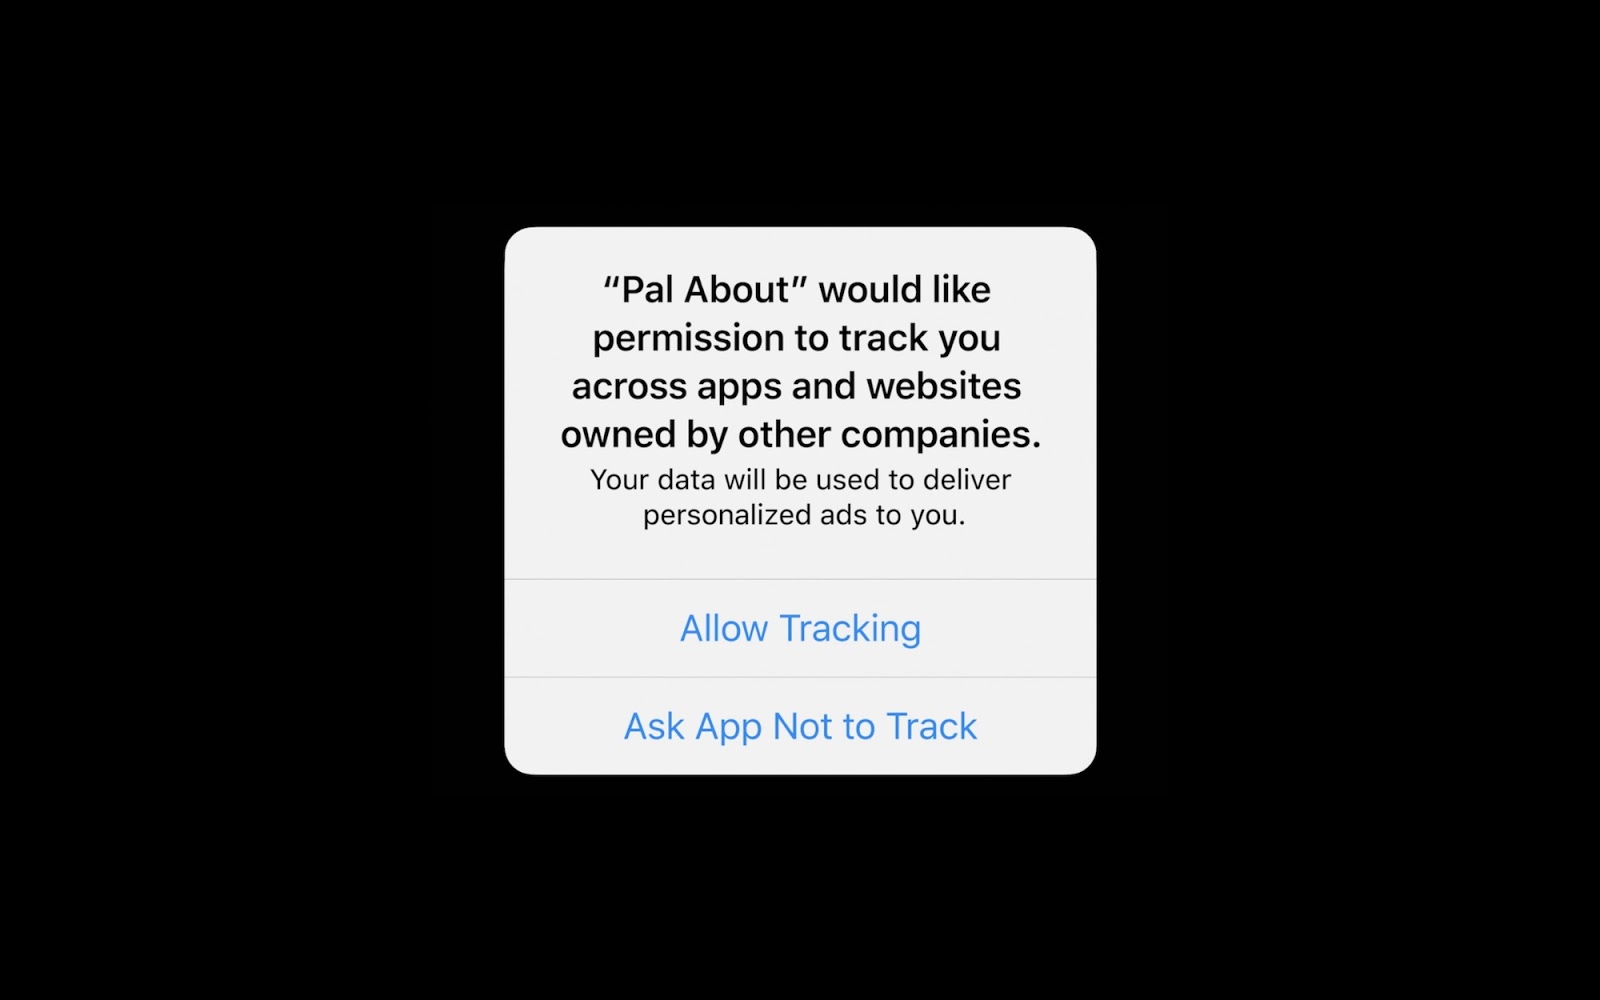 Pal About asking permission to allow tracking due to Apple iOs 14 update.